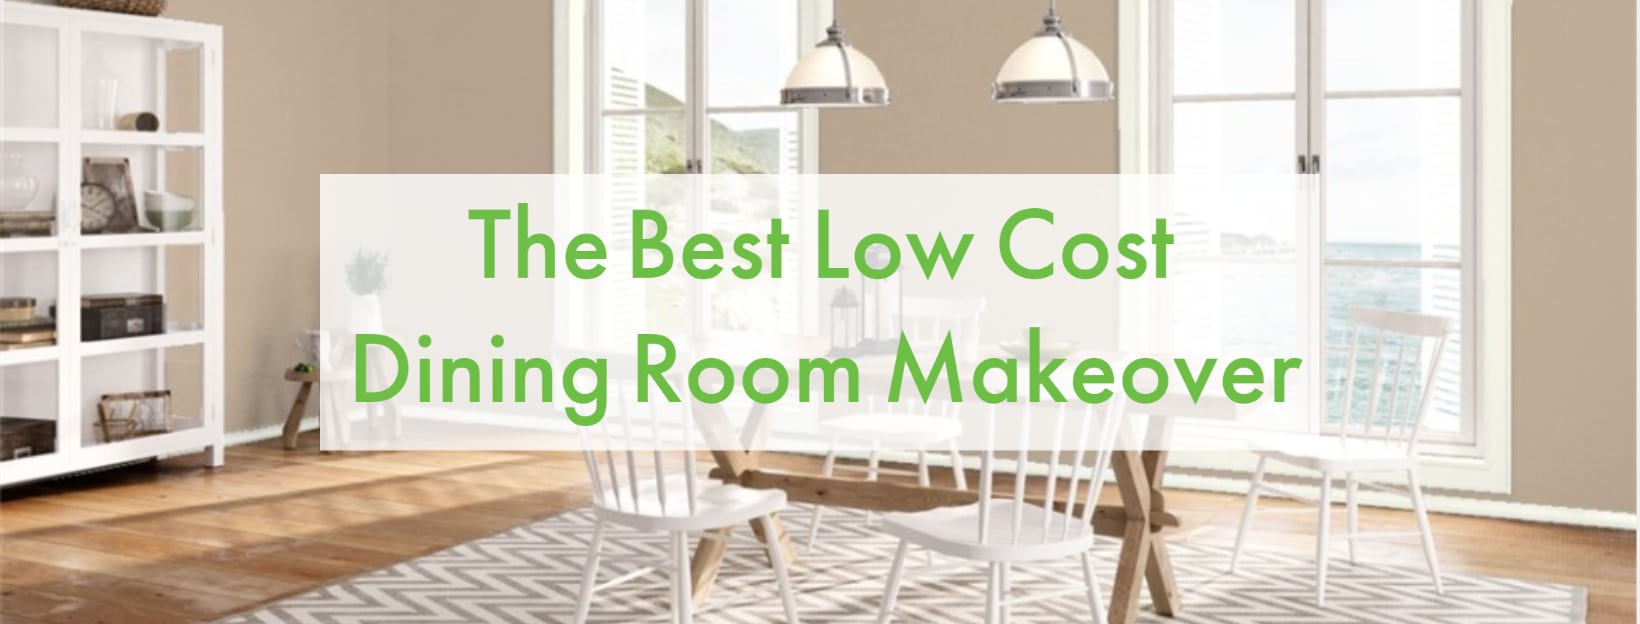 The Best Low Cost Dining Room Makeover